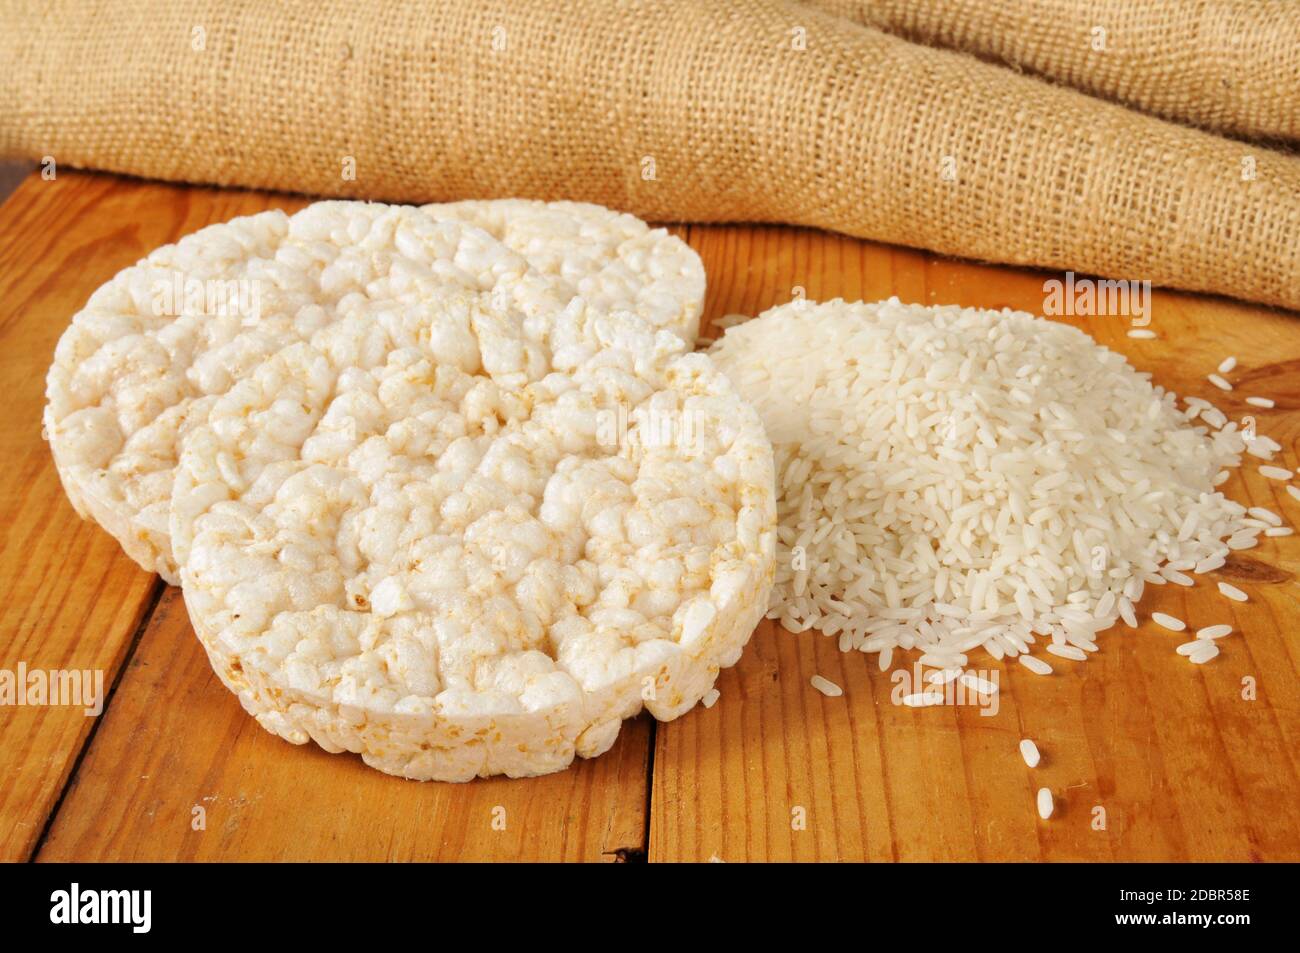 Puffed ricecakes with long grain white rice on a rustic wood table Stock Photo